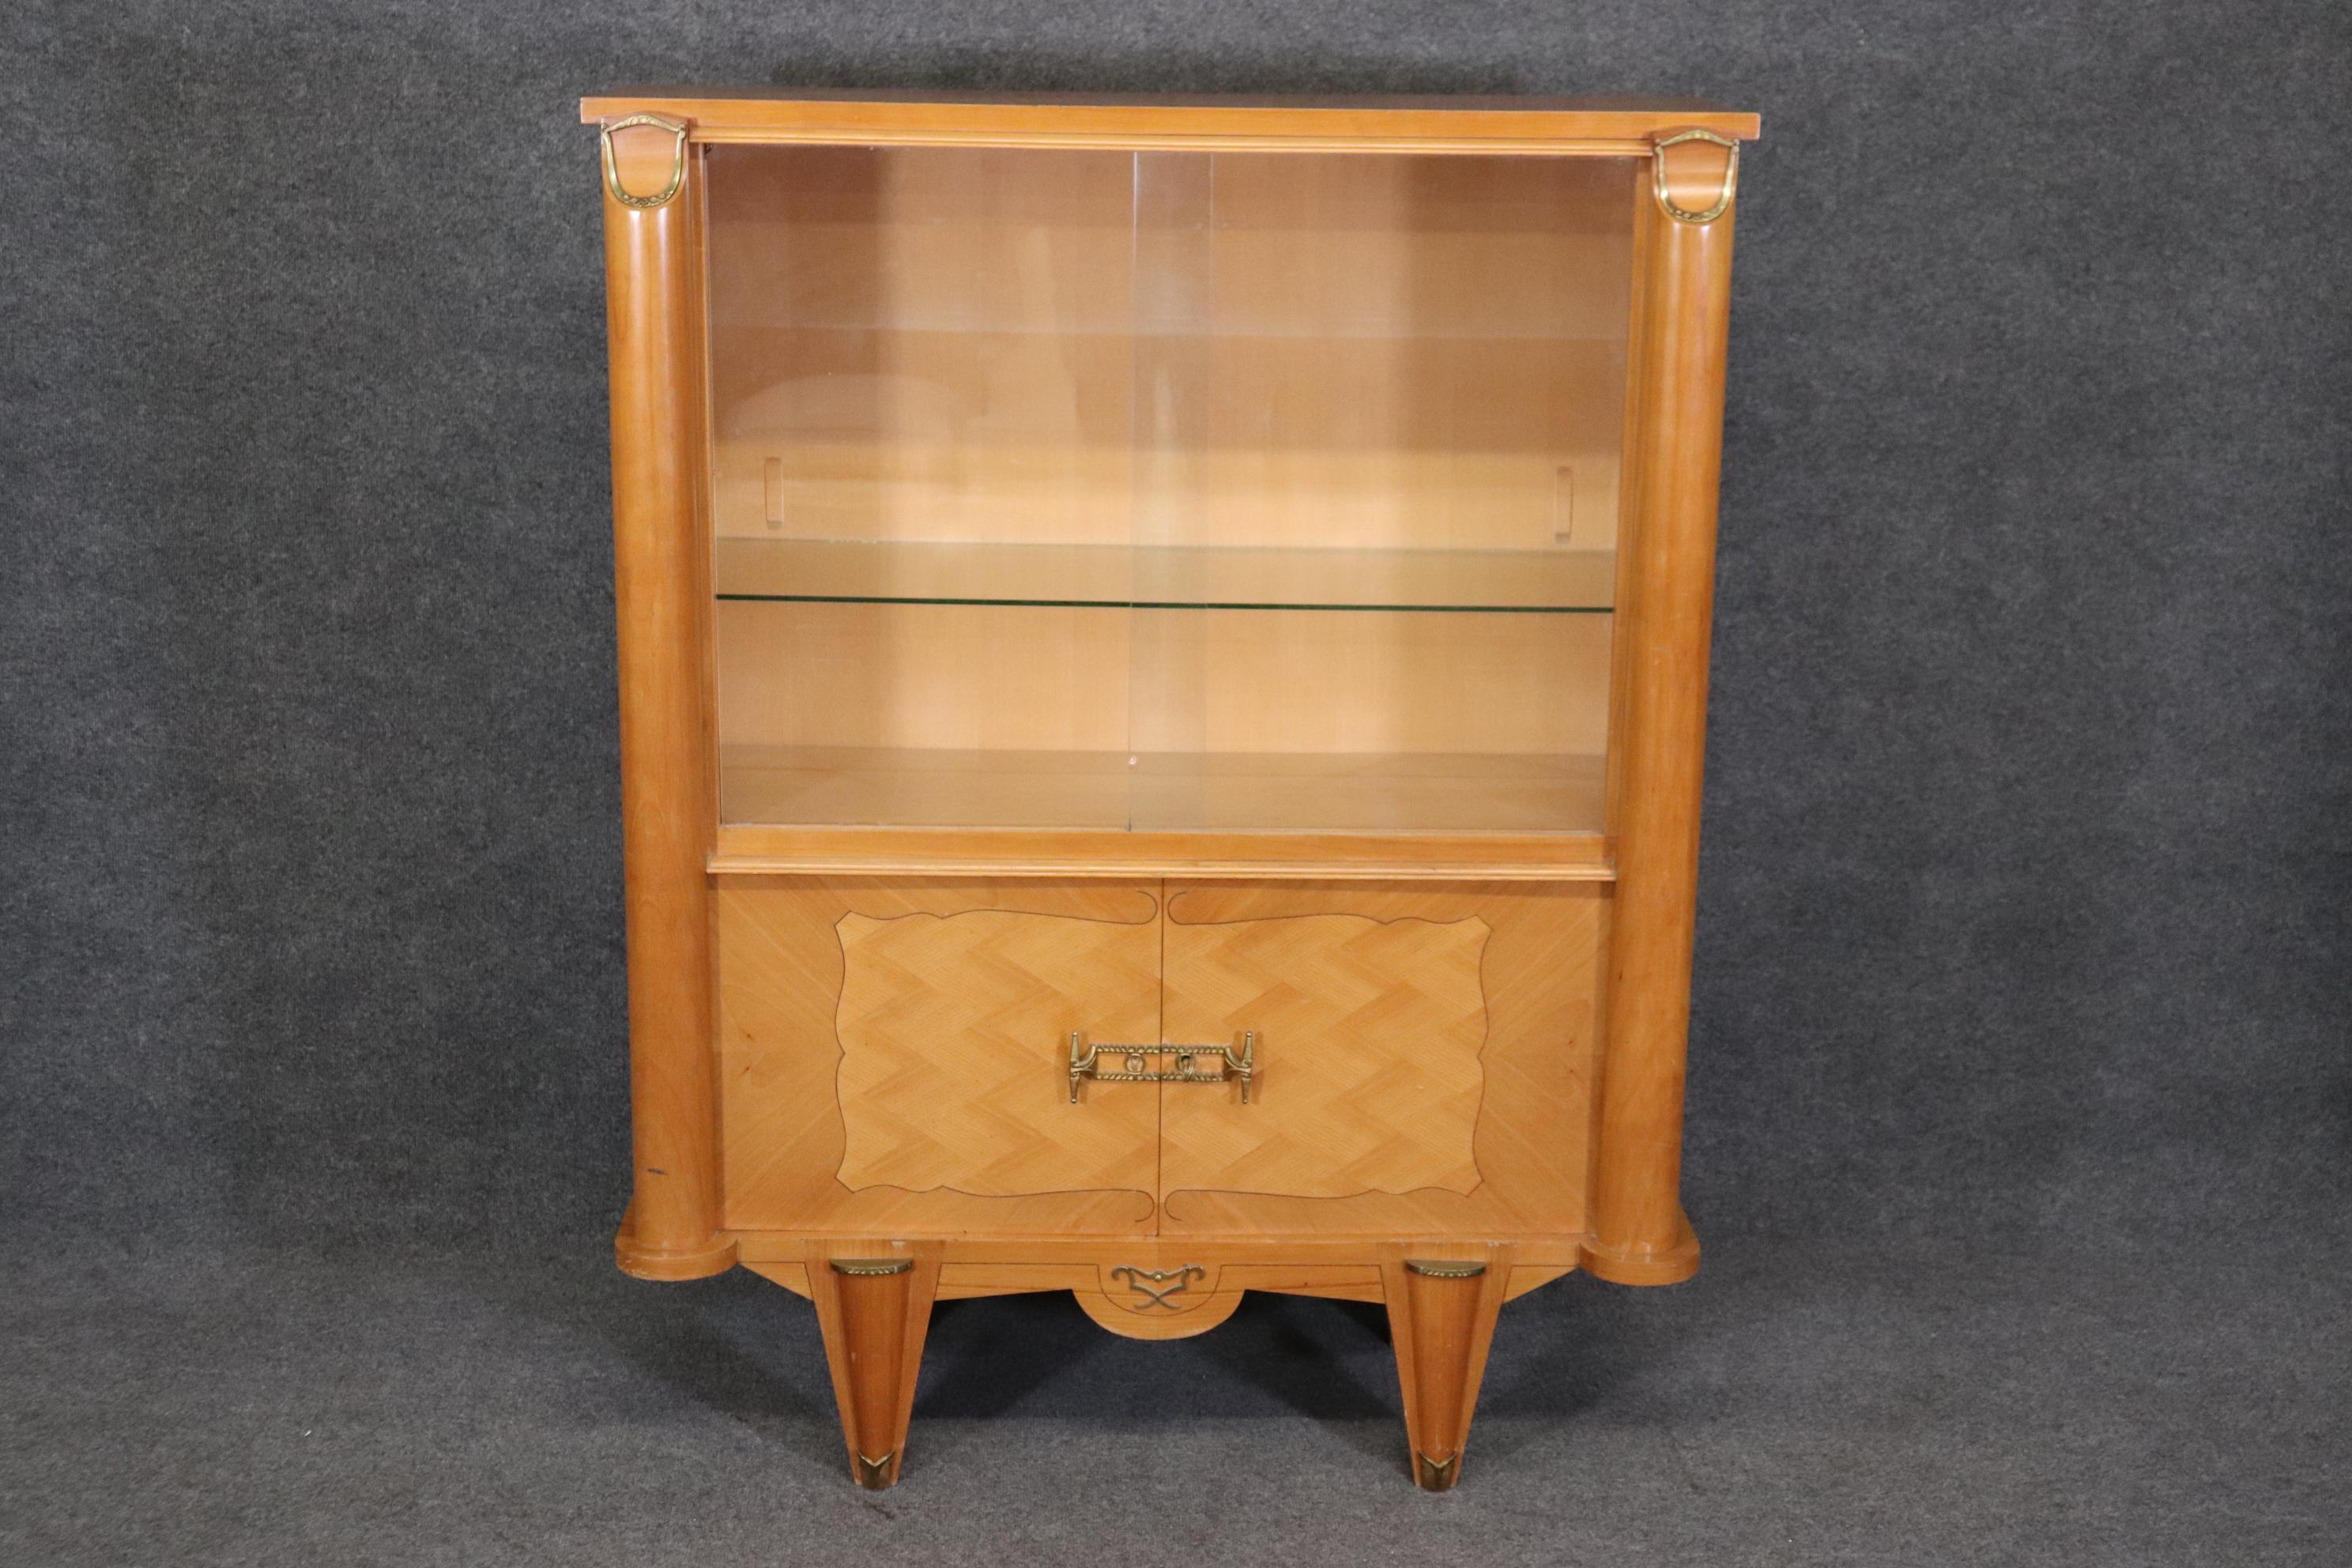 Manner of Andre Arbus Sycamore Art Deco Mid Century Modern China Cabinet  (Art déco) im Angebot